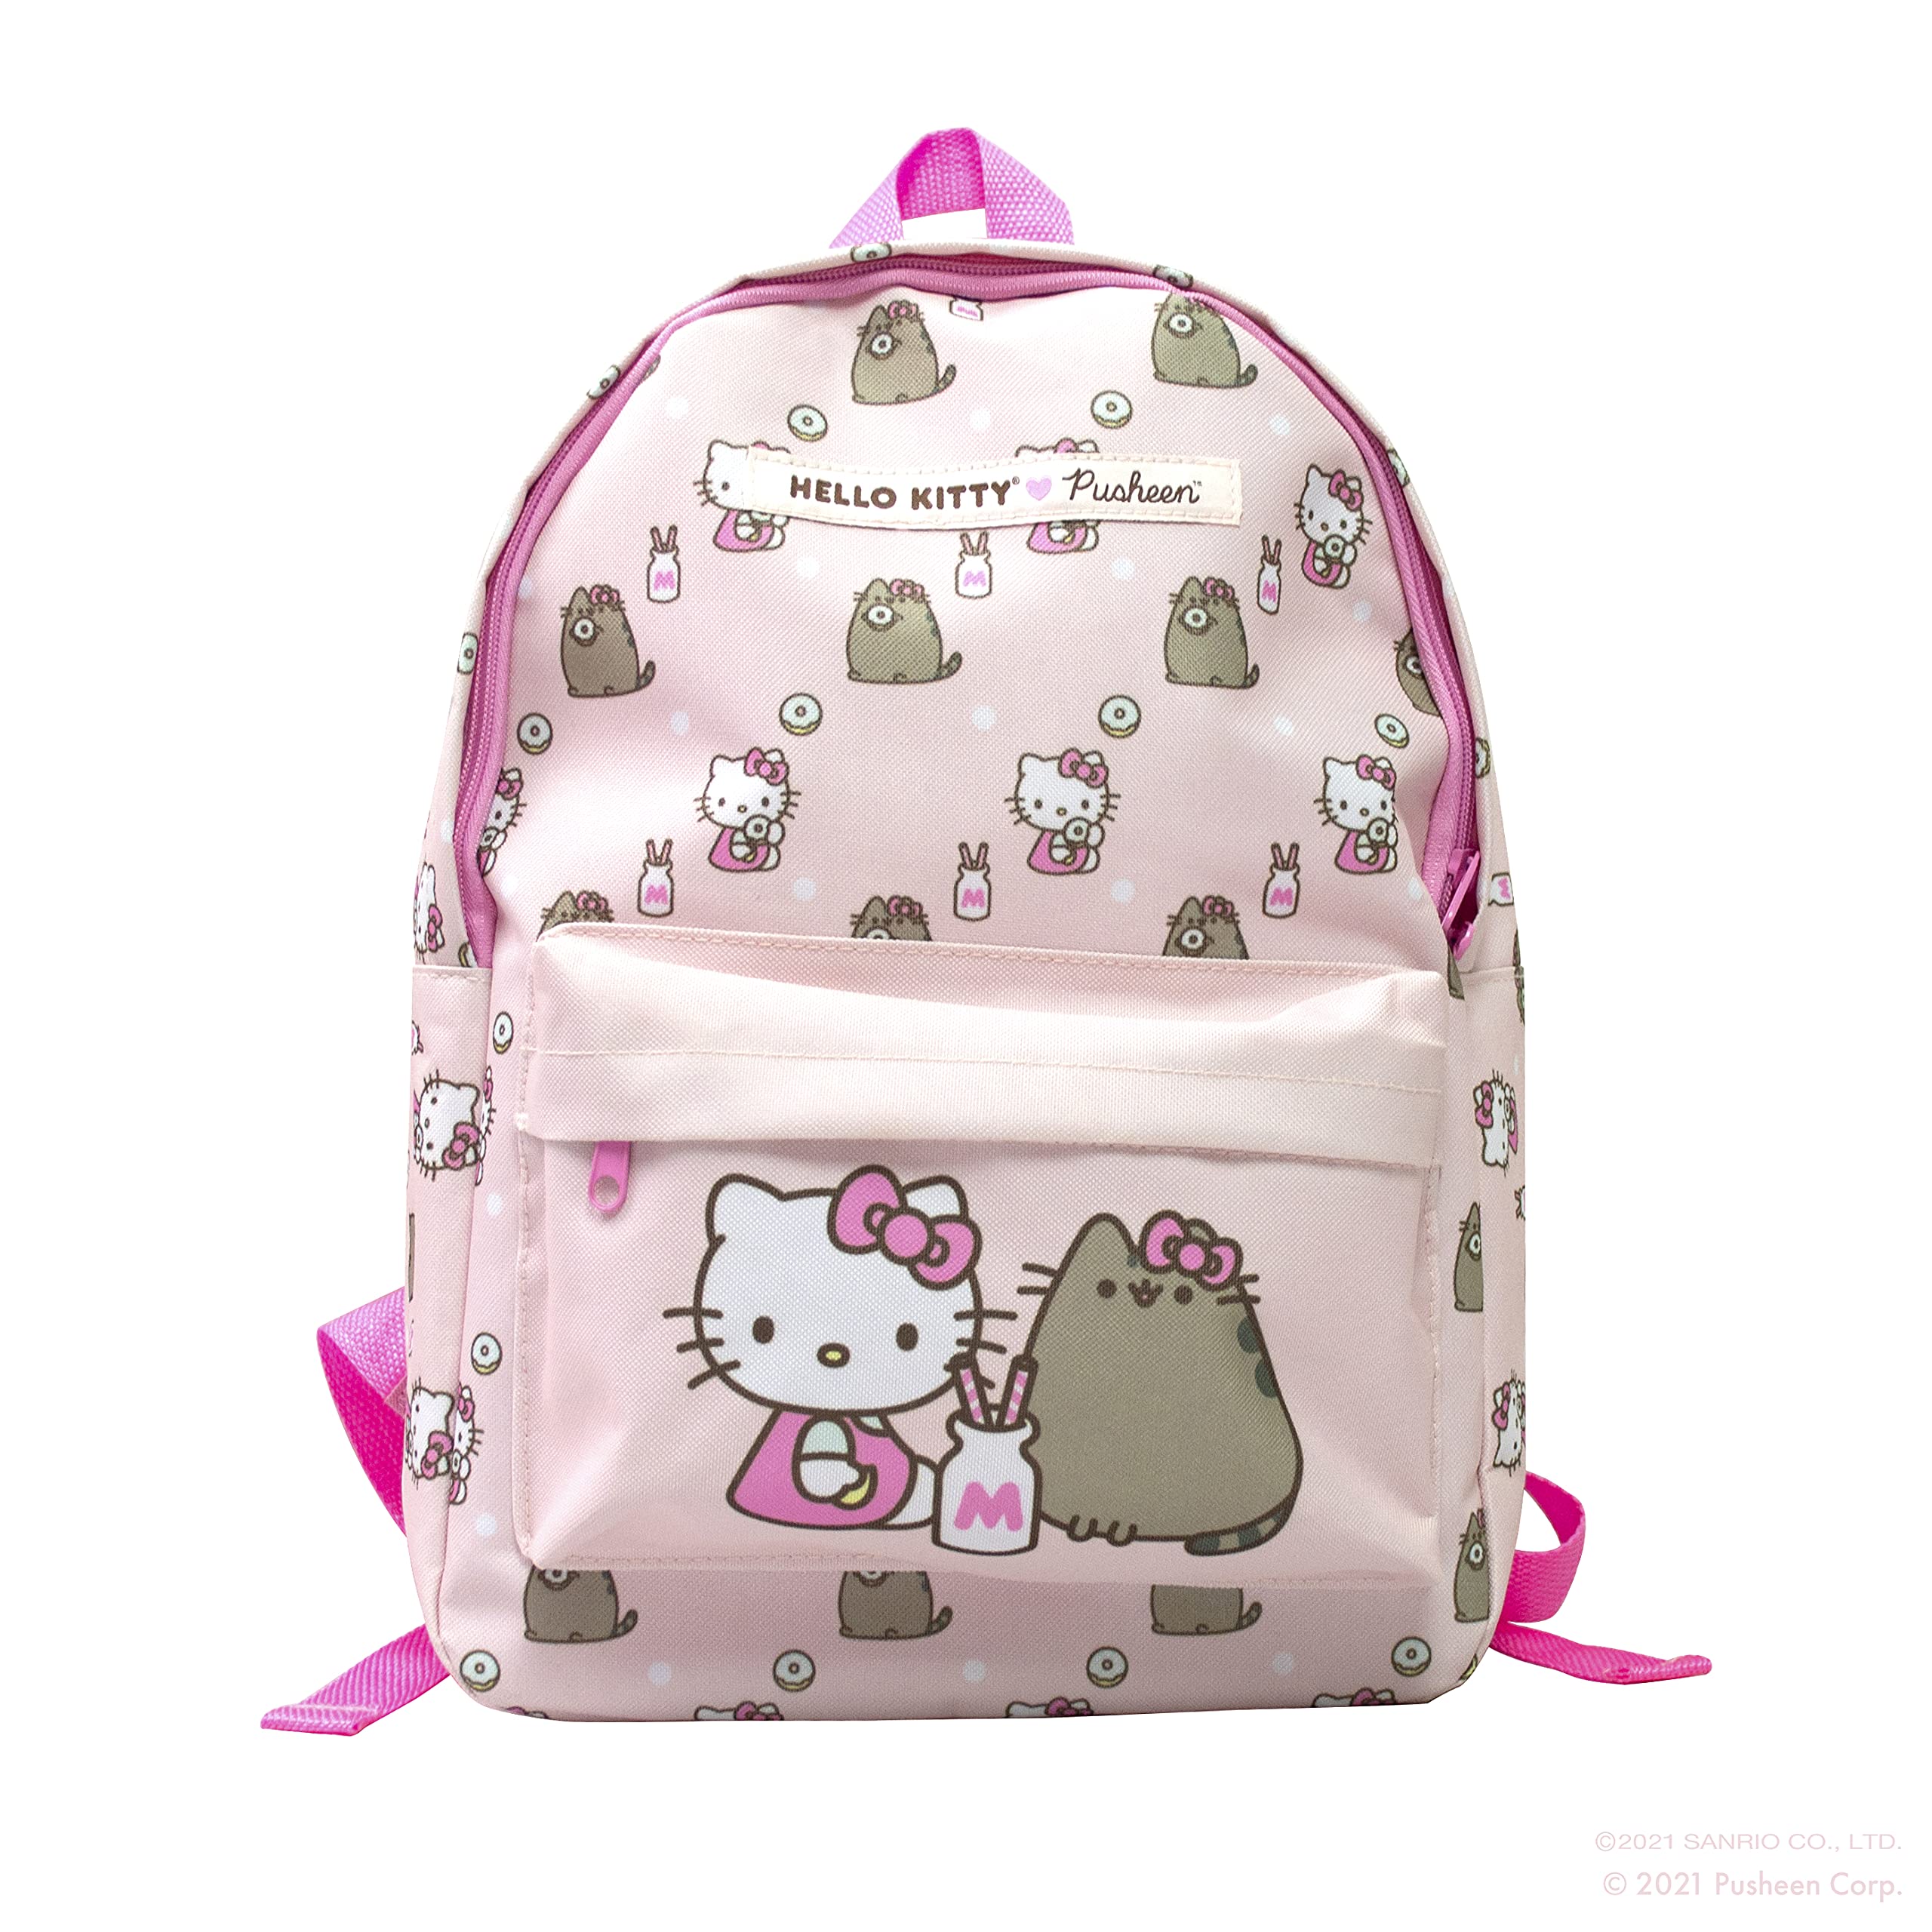 Hello Kitty x Pusheen Backpack | Back to School | Rucksack | Cute Things | Large Backpack | Backpack for Girls and Boys